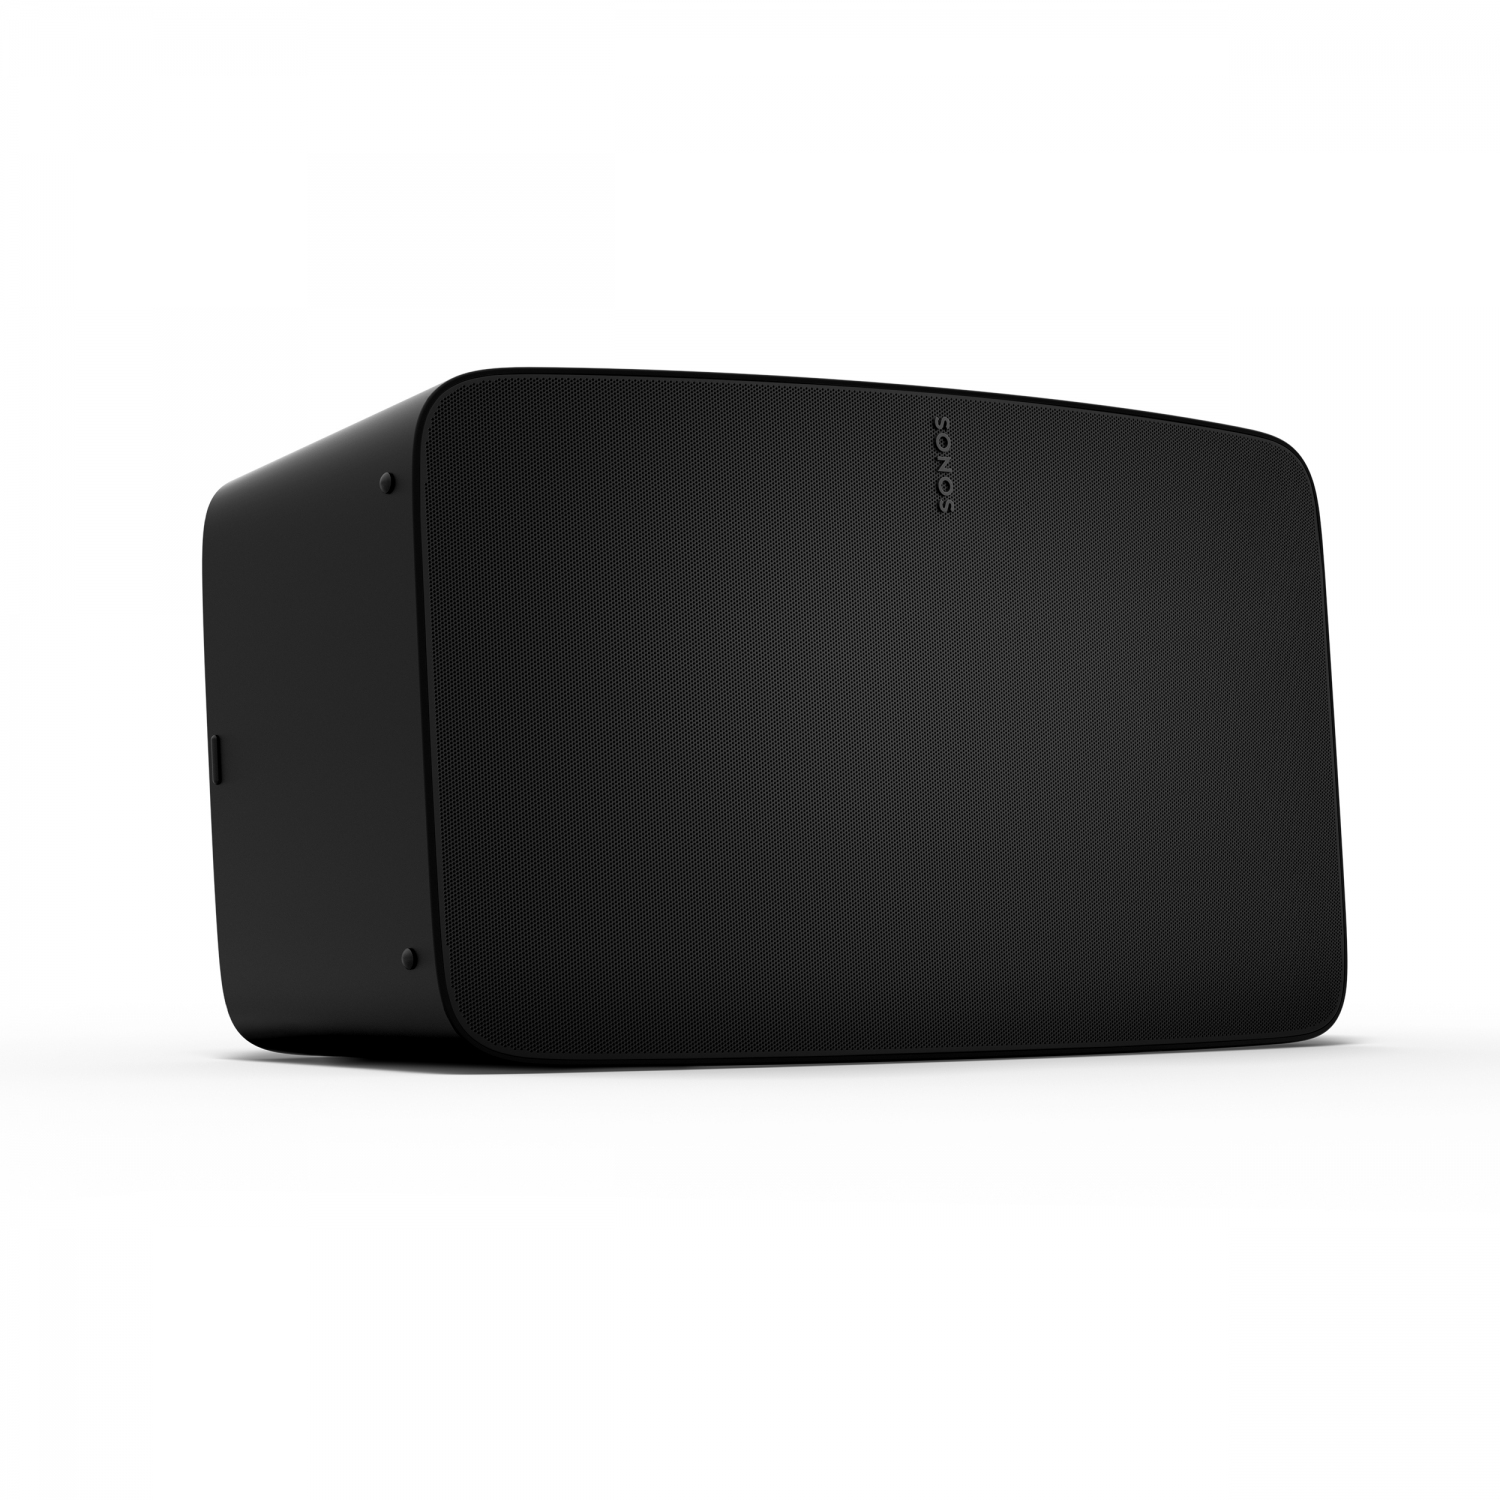 Sonos Five black - the powerful smart speaker with brilliant sound McMichaels | Sony Centre & Euronics Stores